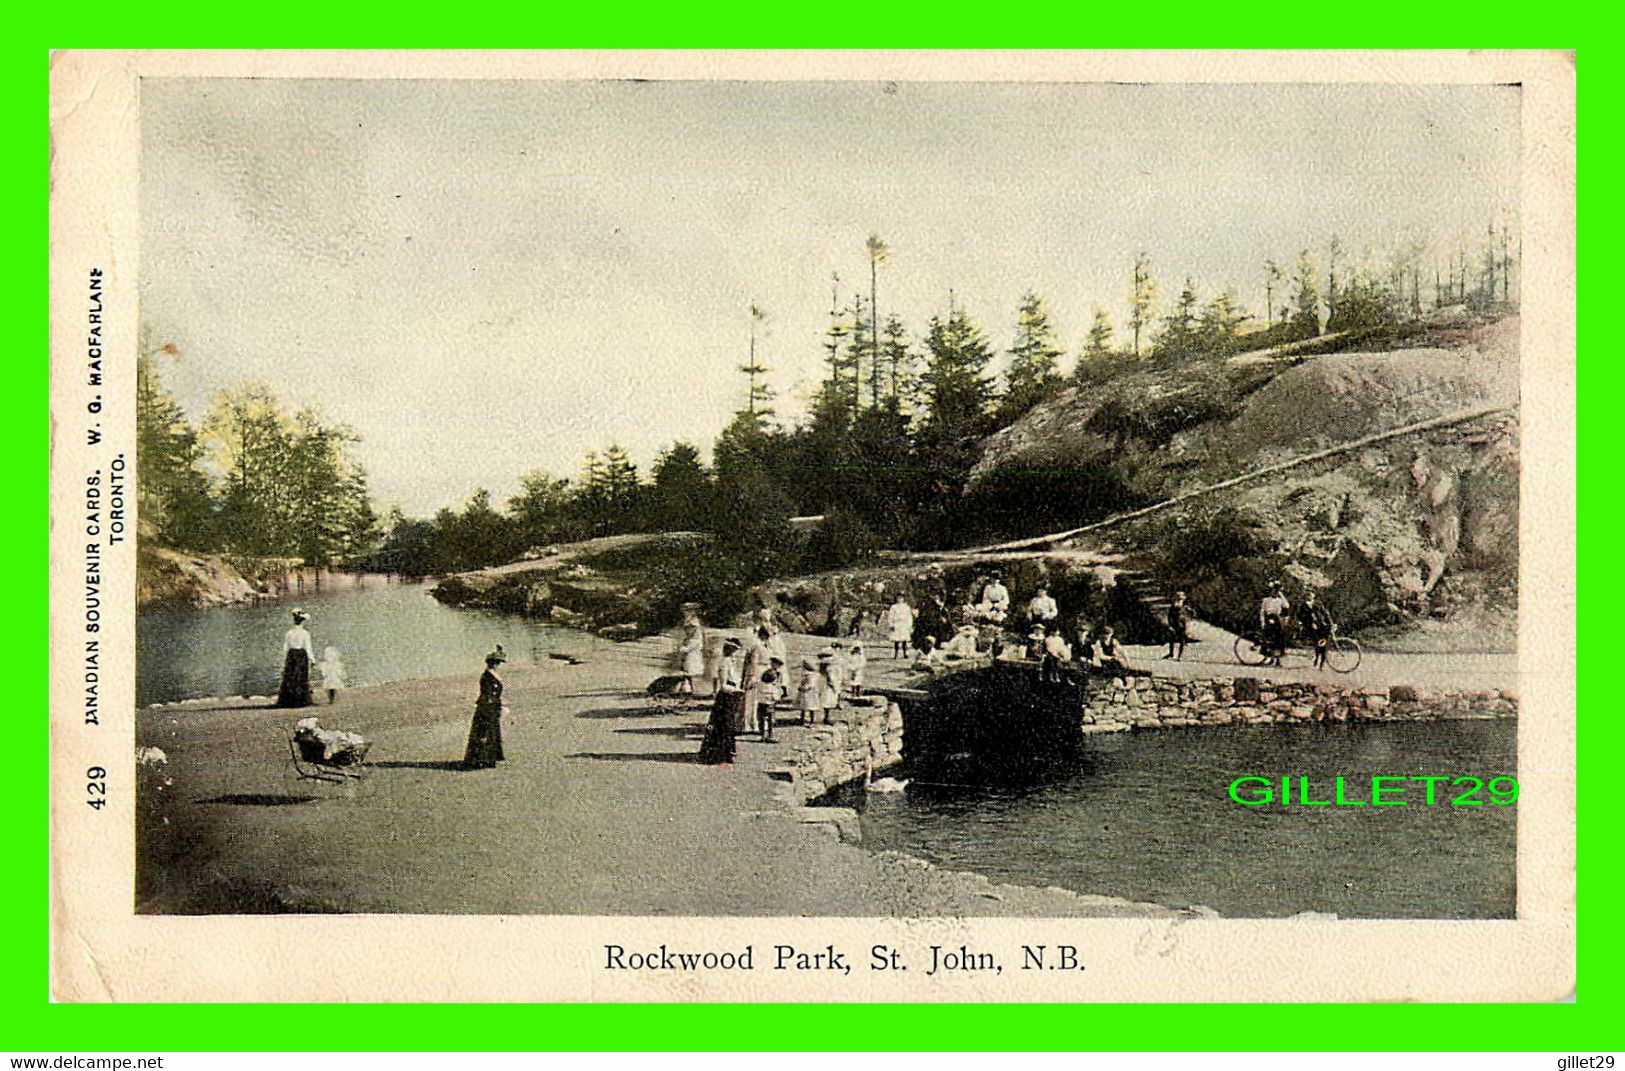 ST JOHN, NEW BRUNSWICK - ROCKWOOD PARK - WELL ANIMATED WITH PEOPLES - W. G. MACFARLANE - TRAVEL IN 1905 - - St. John